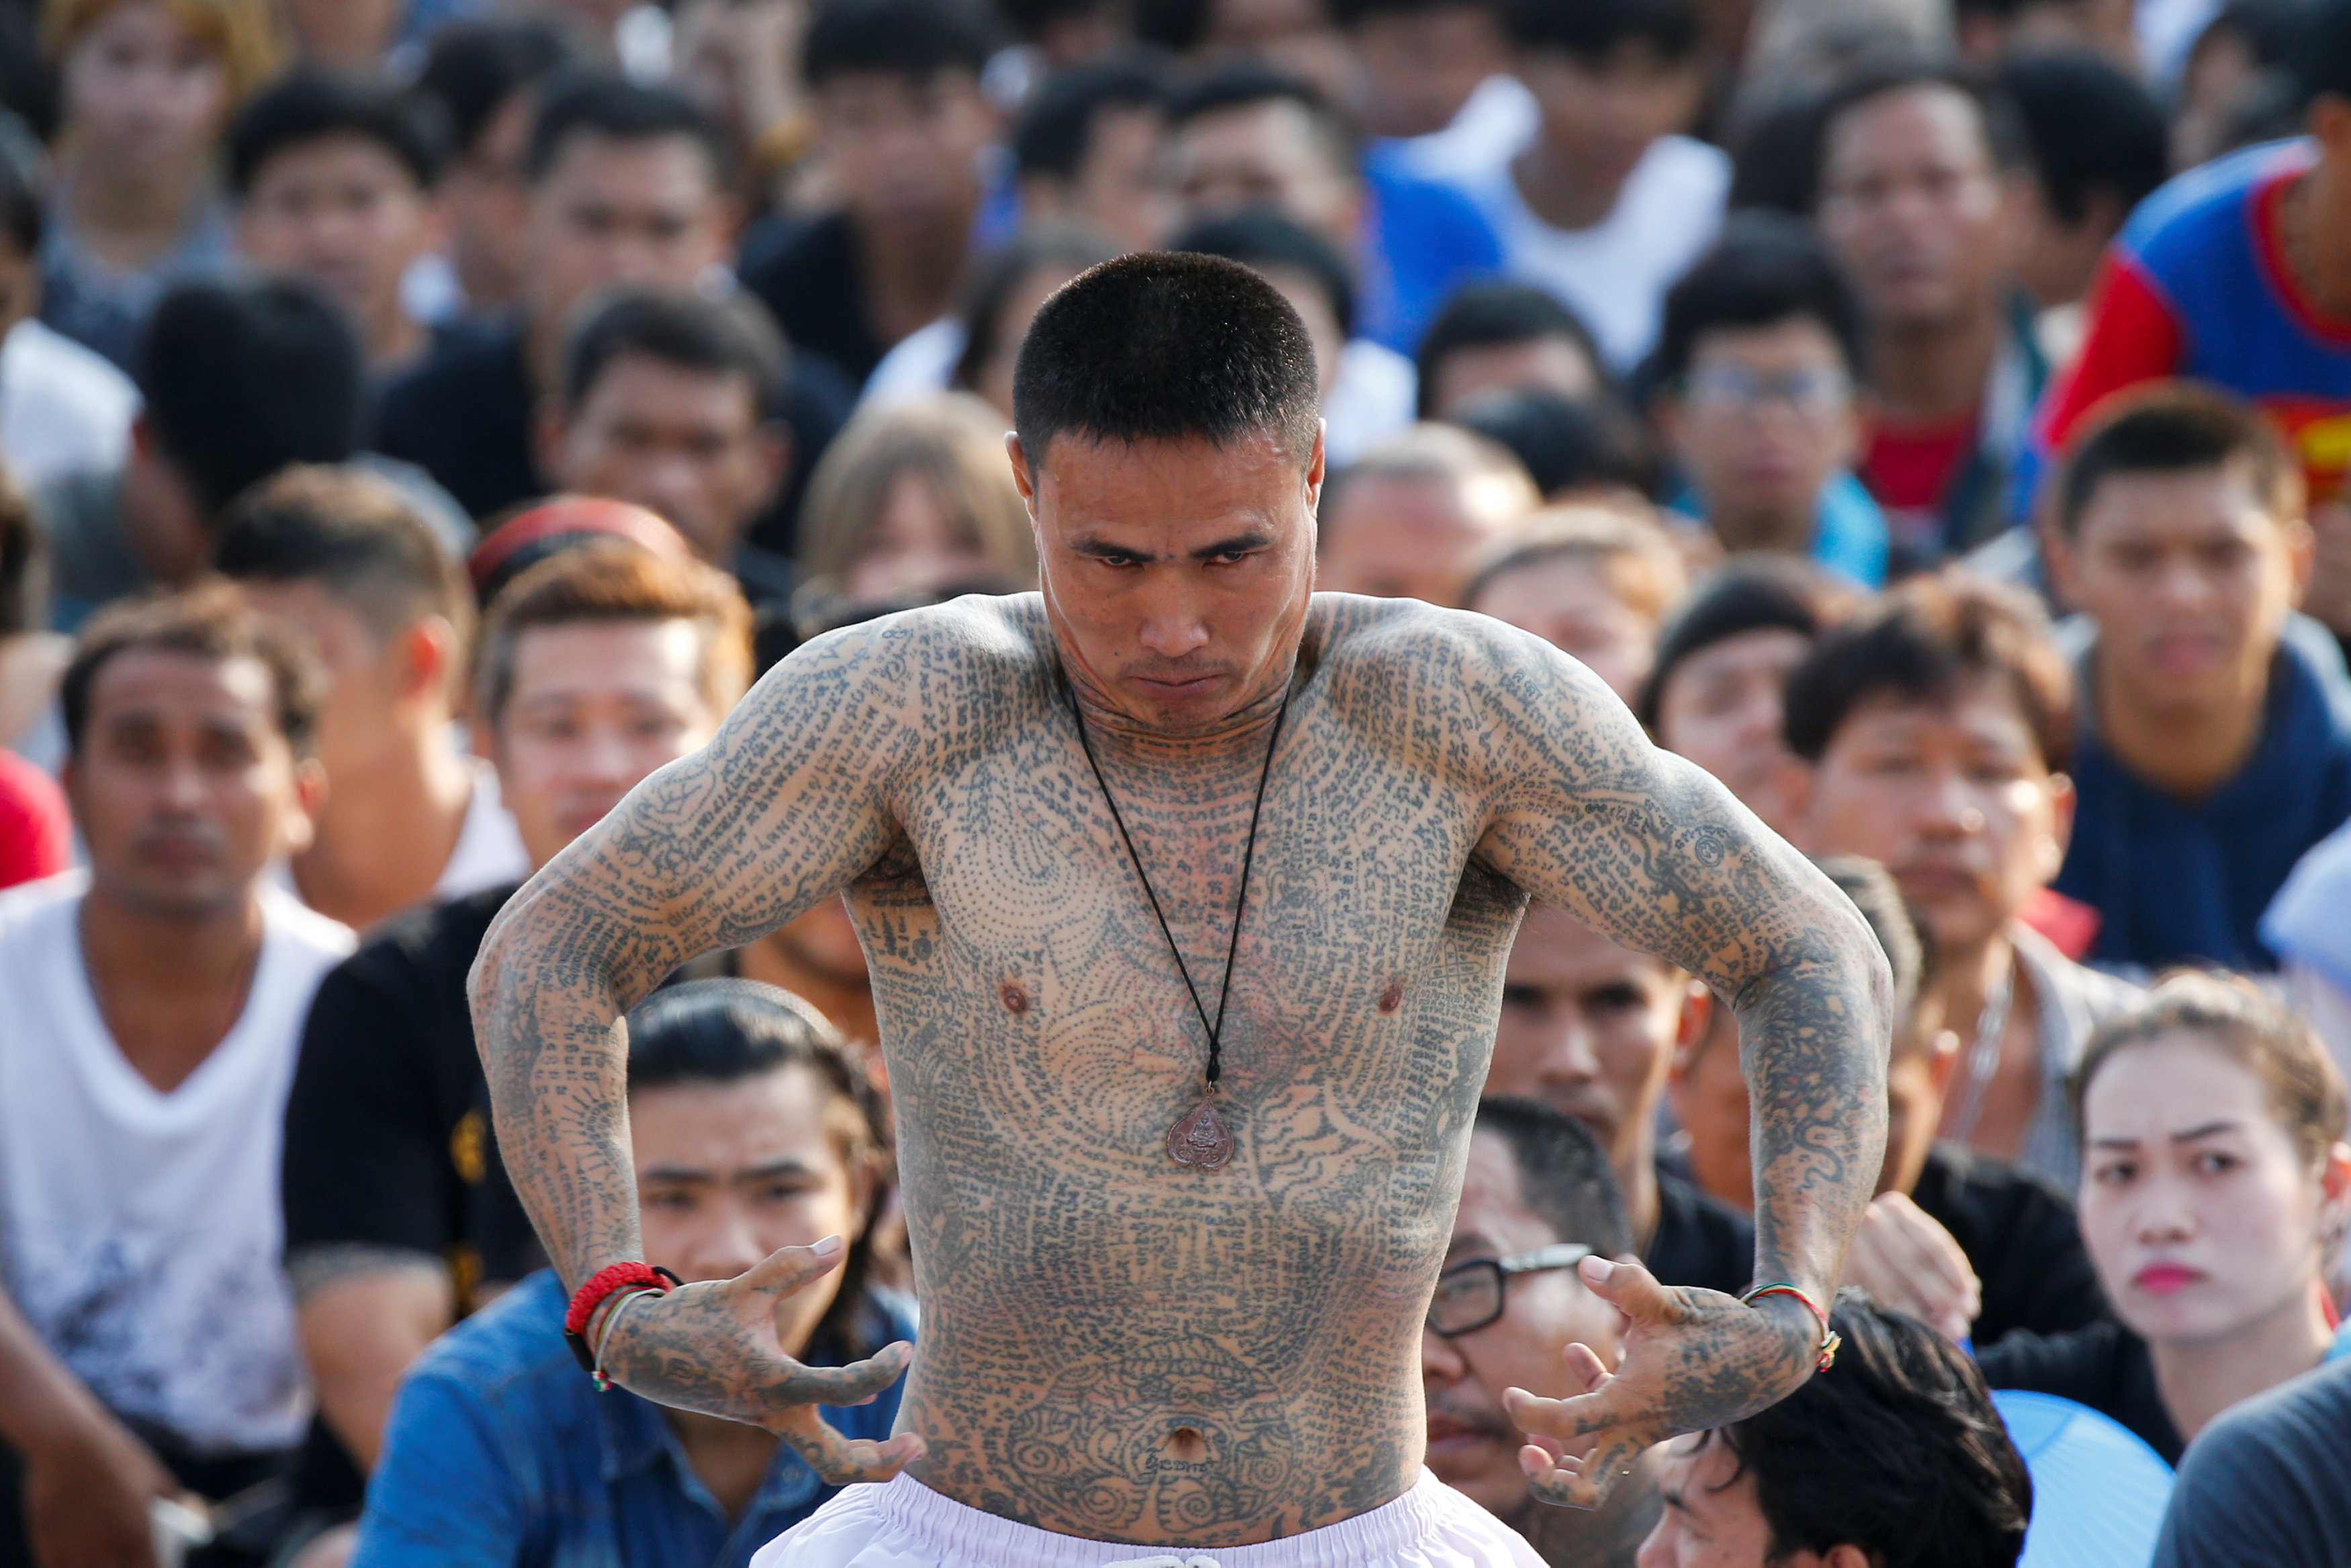 A devotee in trance mimics a beast during a religious tattoo festival at Wat Bang Phra, where devotees come to recharge the power of their sacred tattoos, in Nakhon Pathom province, Thailand, March 11, 2017. REUTERS/Jorge Silva